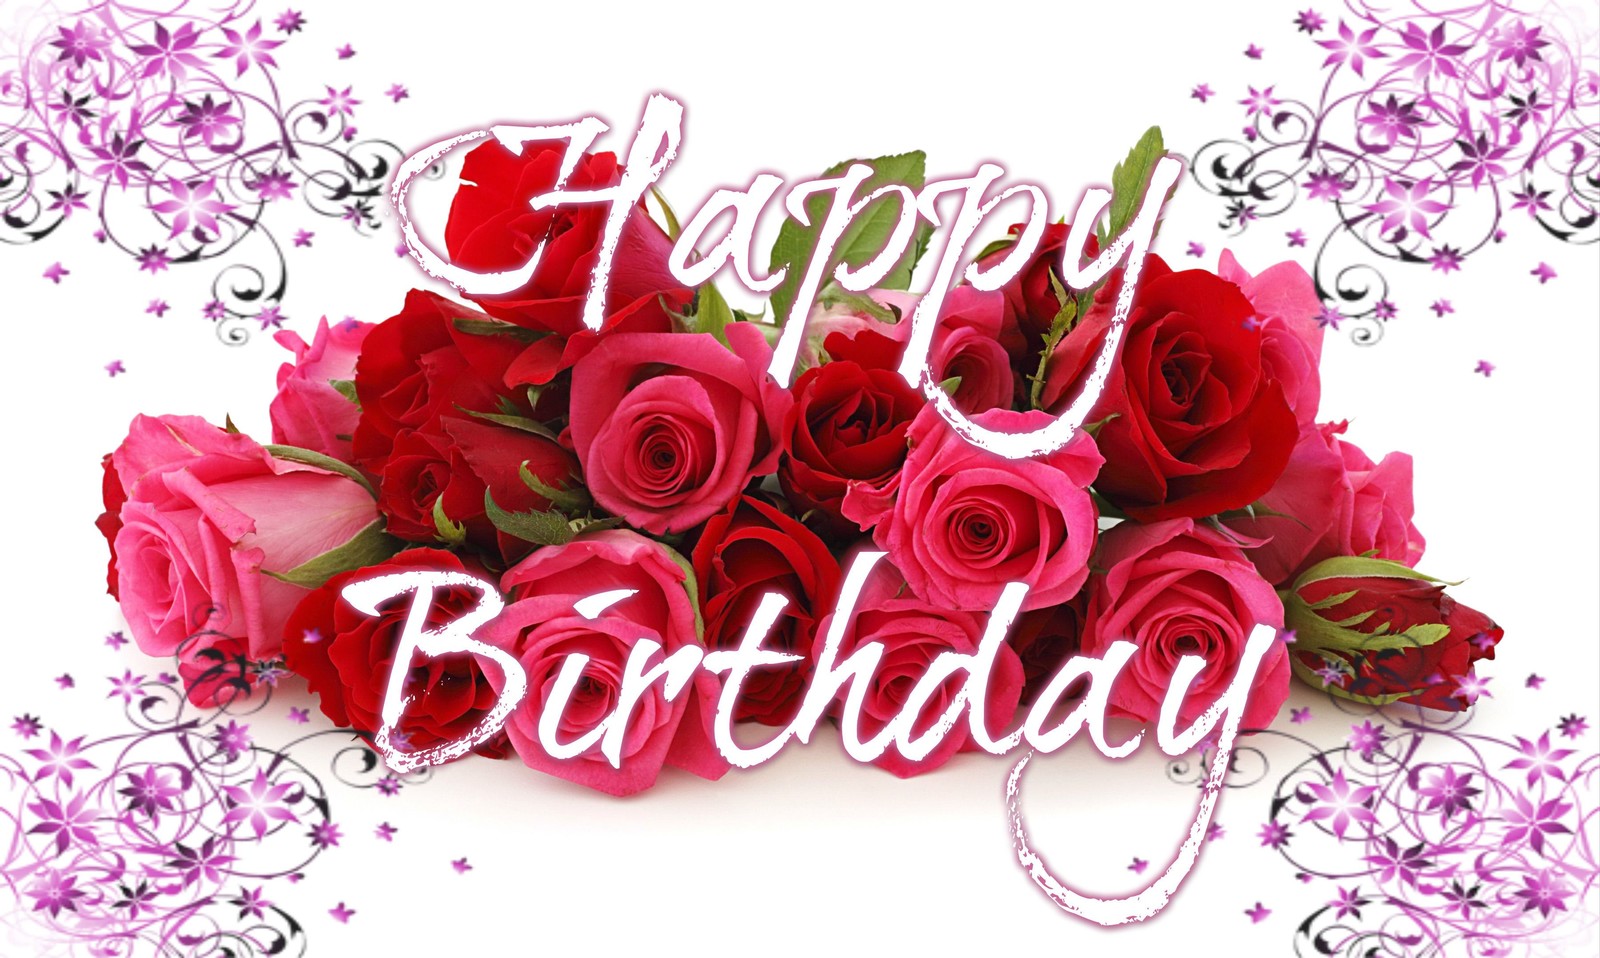 Cute happy birthday wishes and images for lovers ilove me...